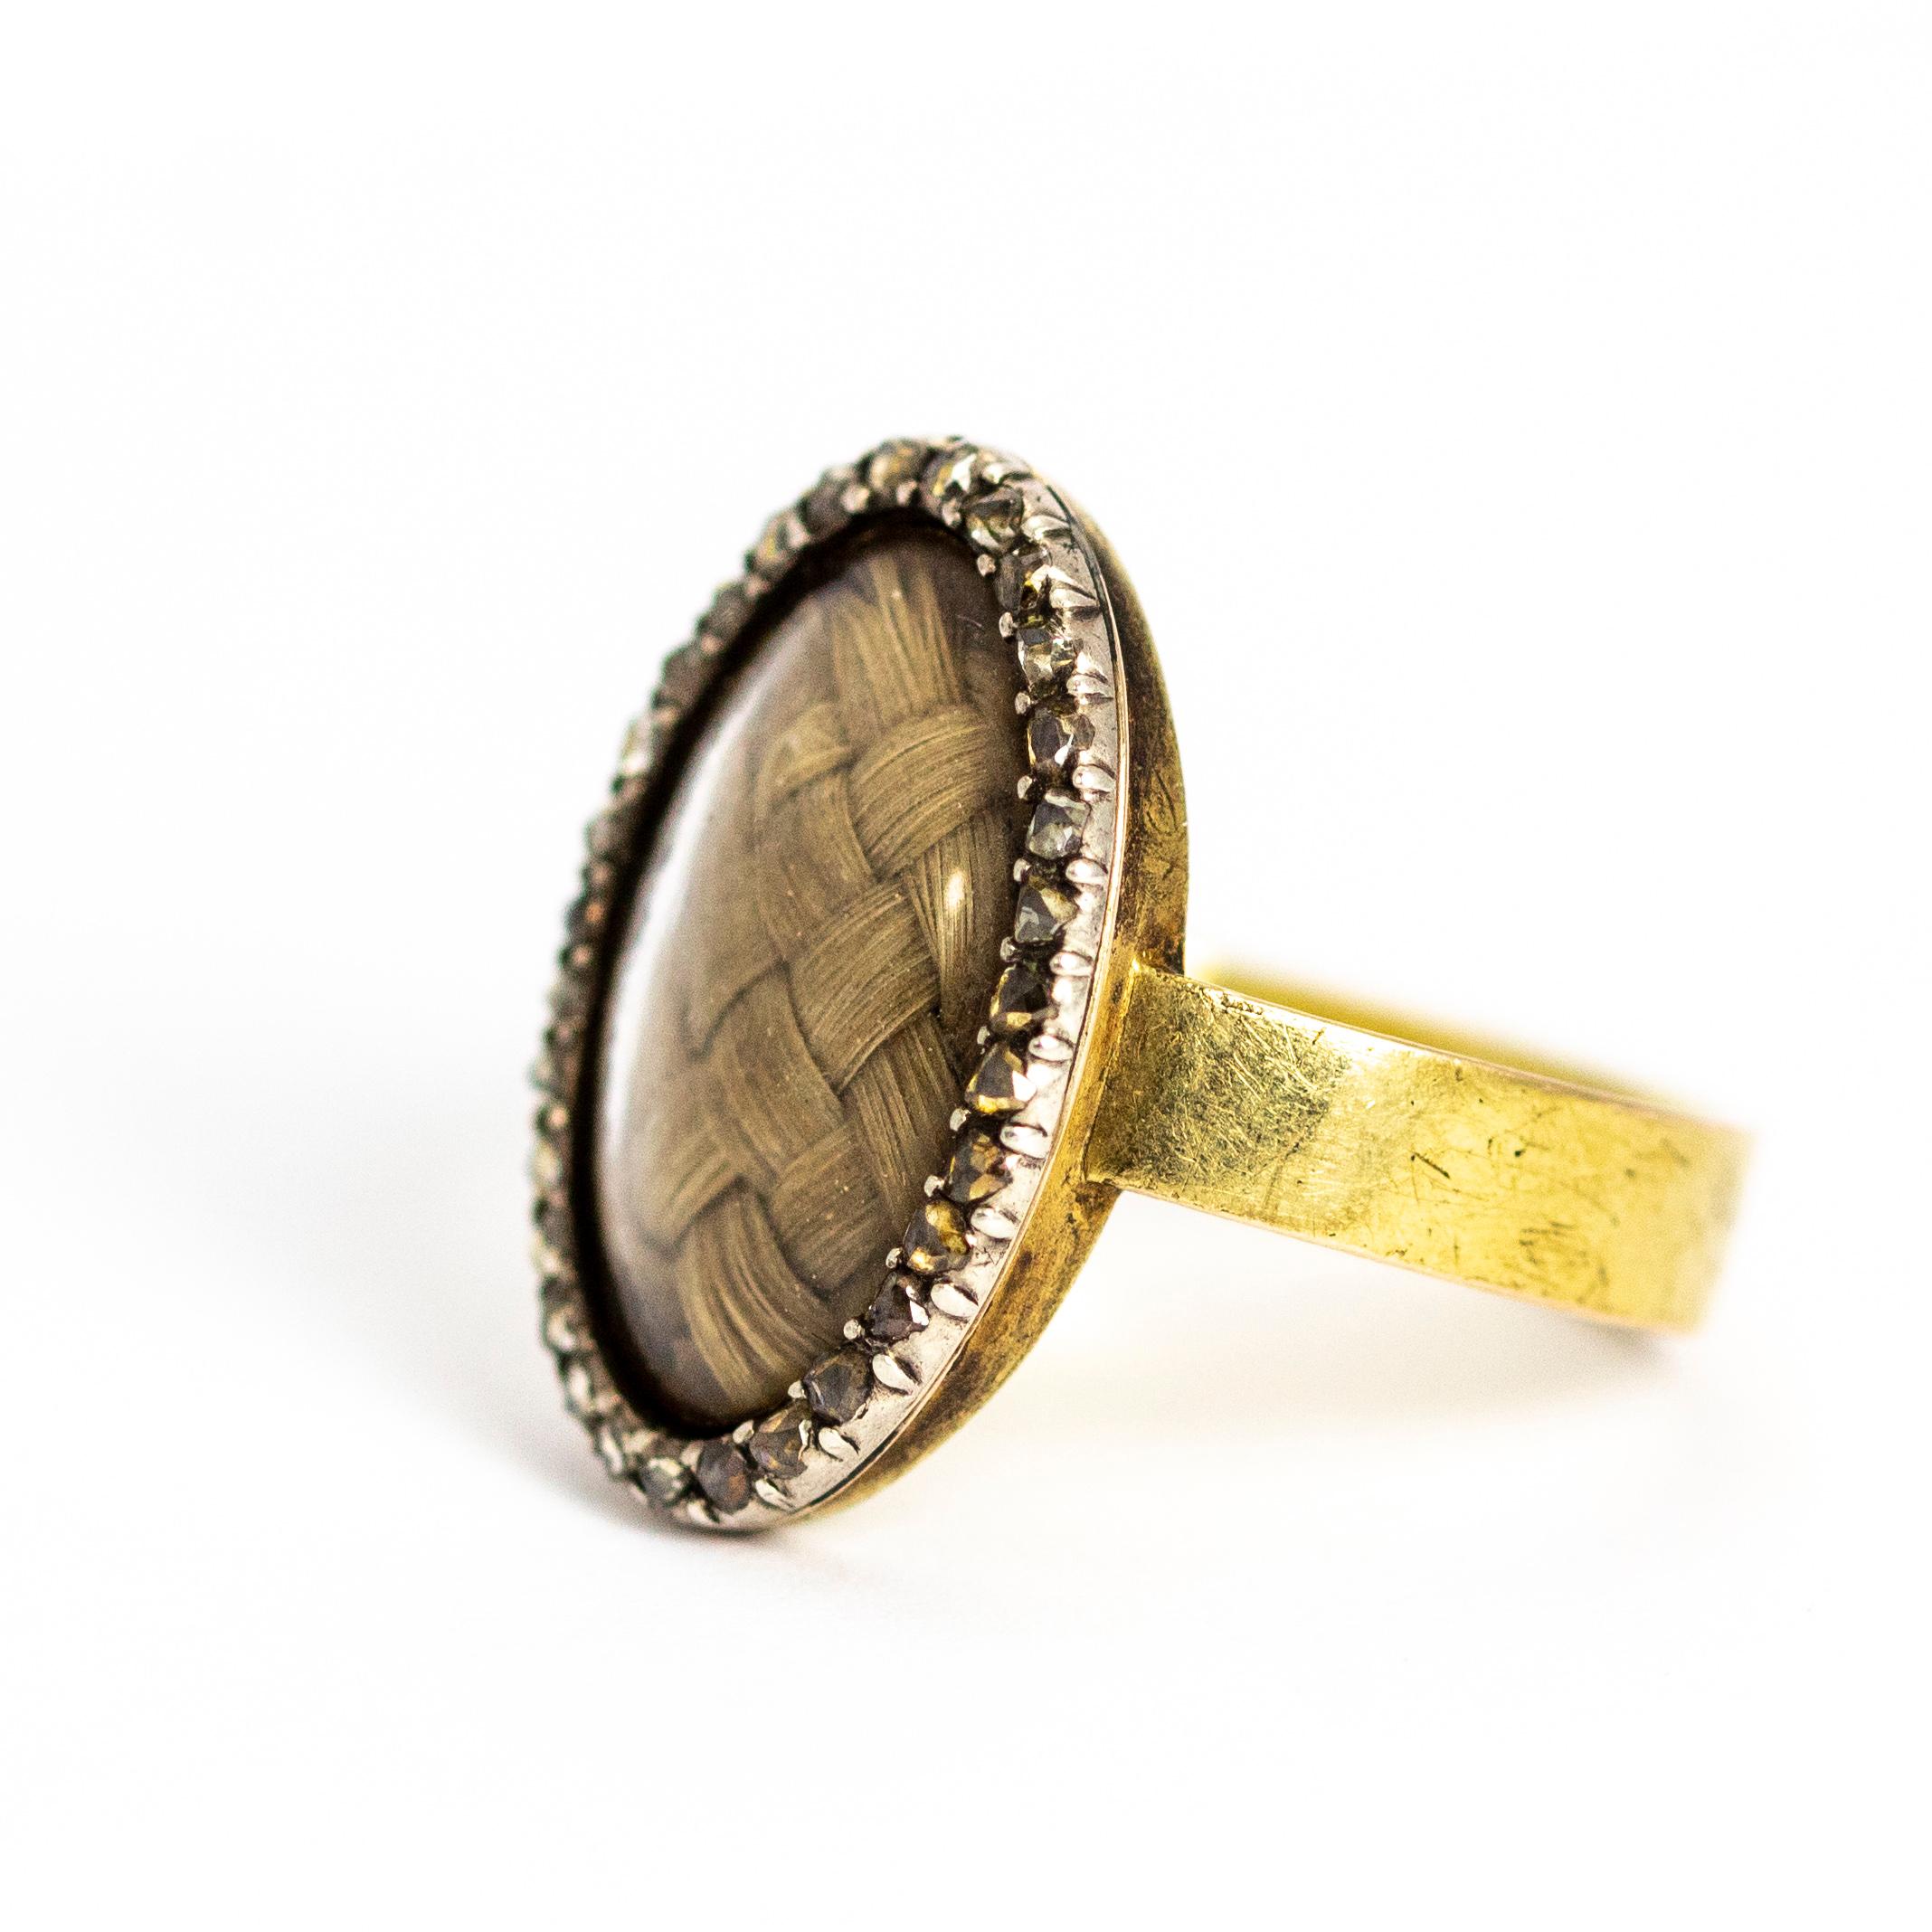 This early victorian mourning ring holds a blonde and perfectly neat plait surrounded by tiny glistening rose cut diamonds. All set in 15ct gold.

Ring Size: O or 7 1/4